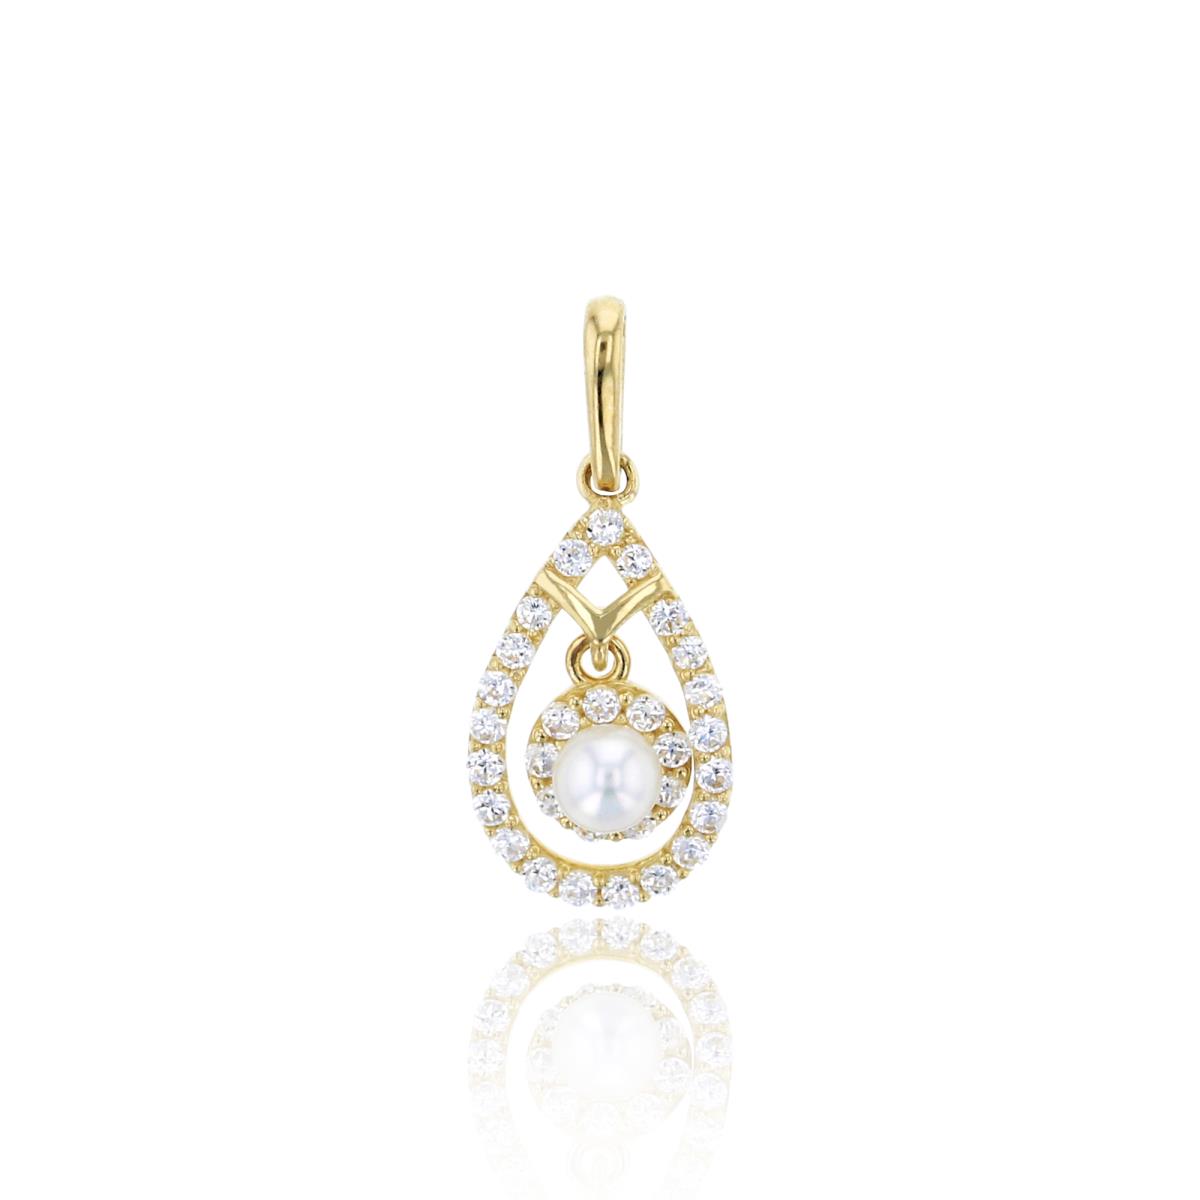 10K Yellow Gold Open Pear Shaped with Dangling 3mm Fresh Water Pearl Pendant